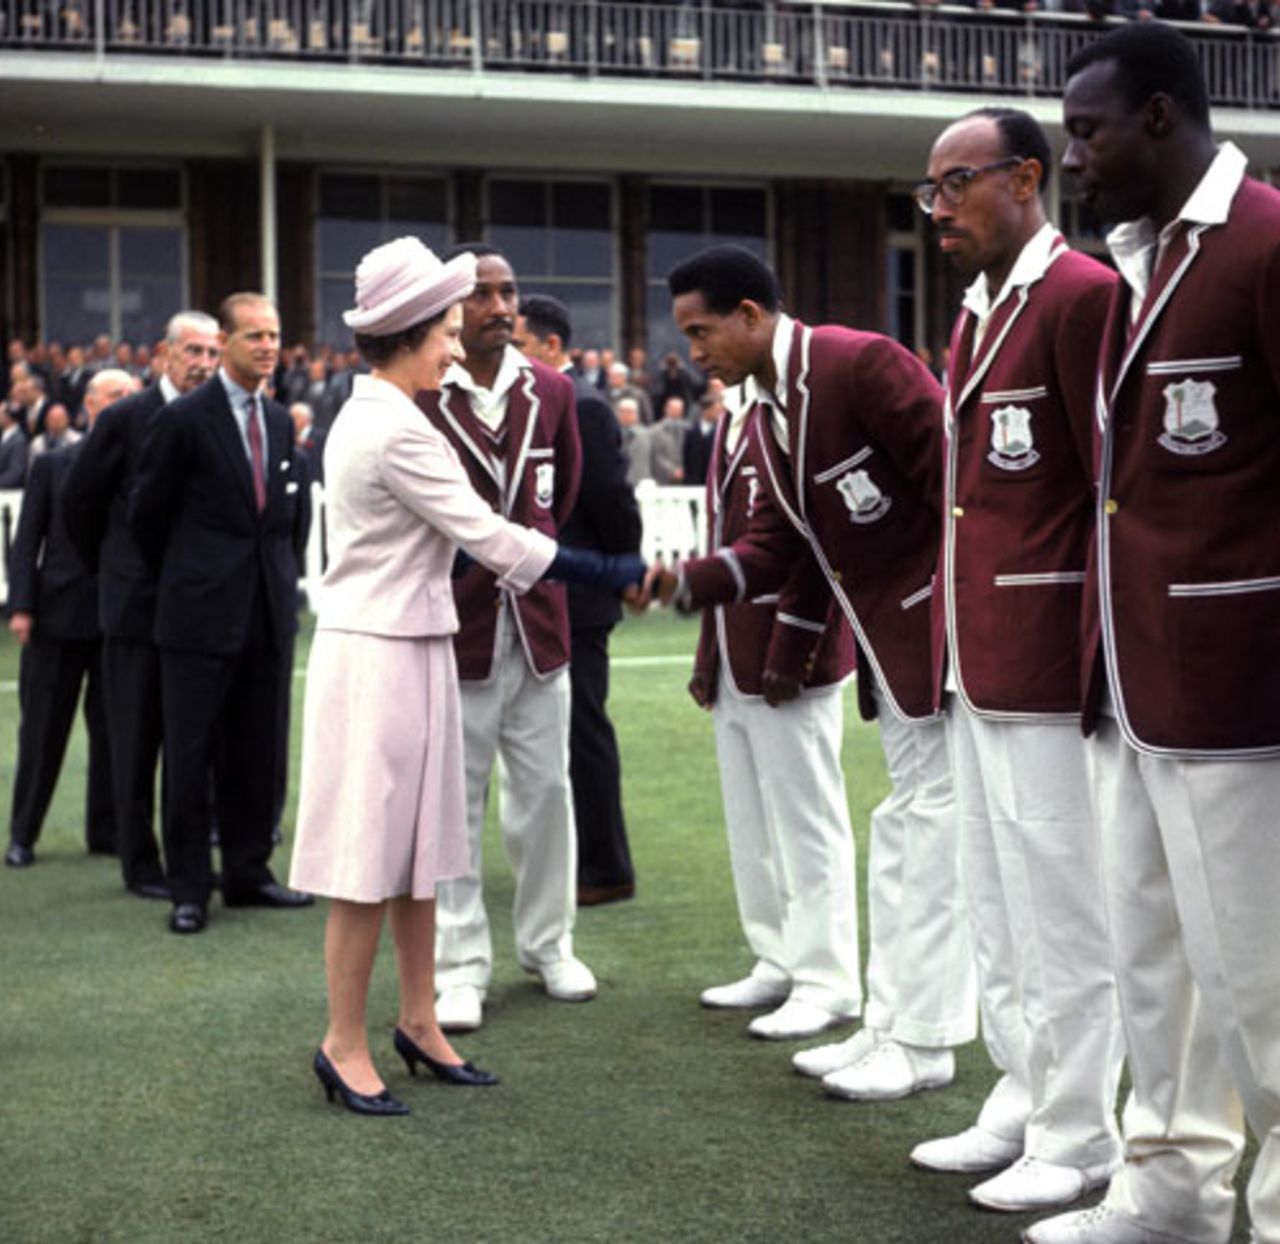 Garry Sobers is introduced to the Queen, England v West Indies, 2nd Test, Lord's, June 20, 1963